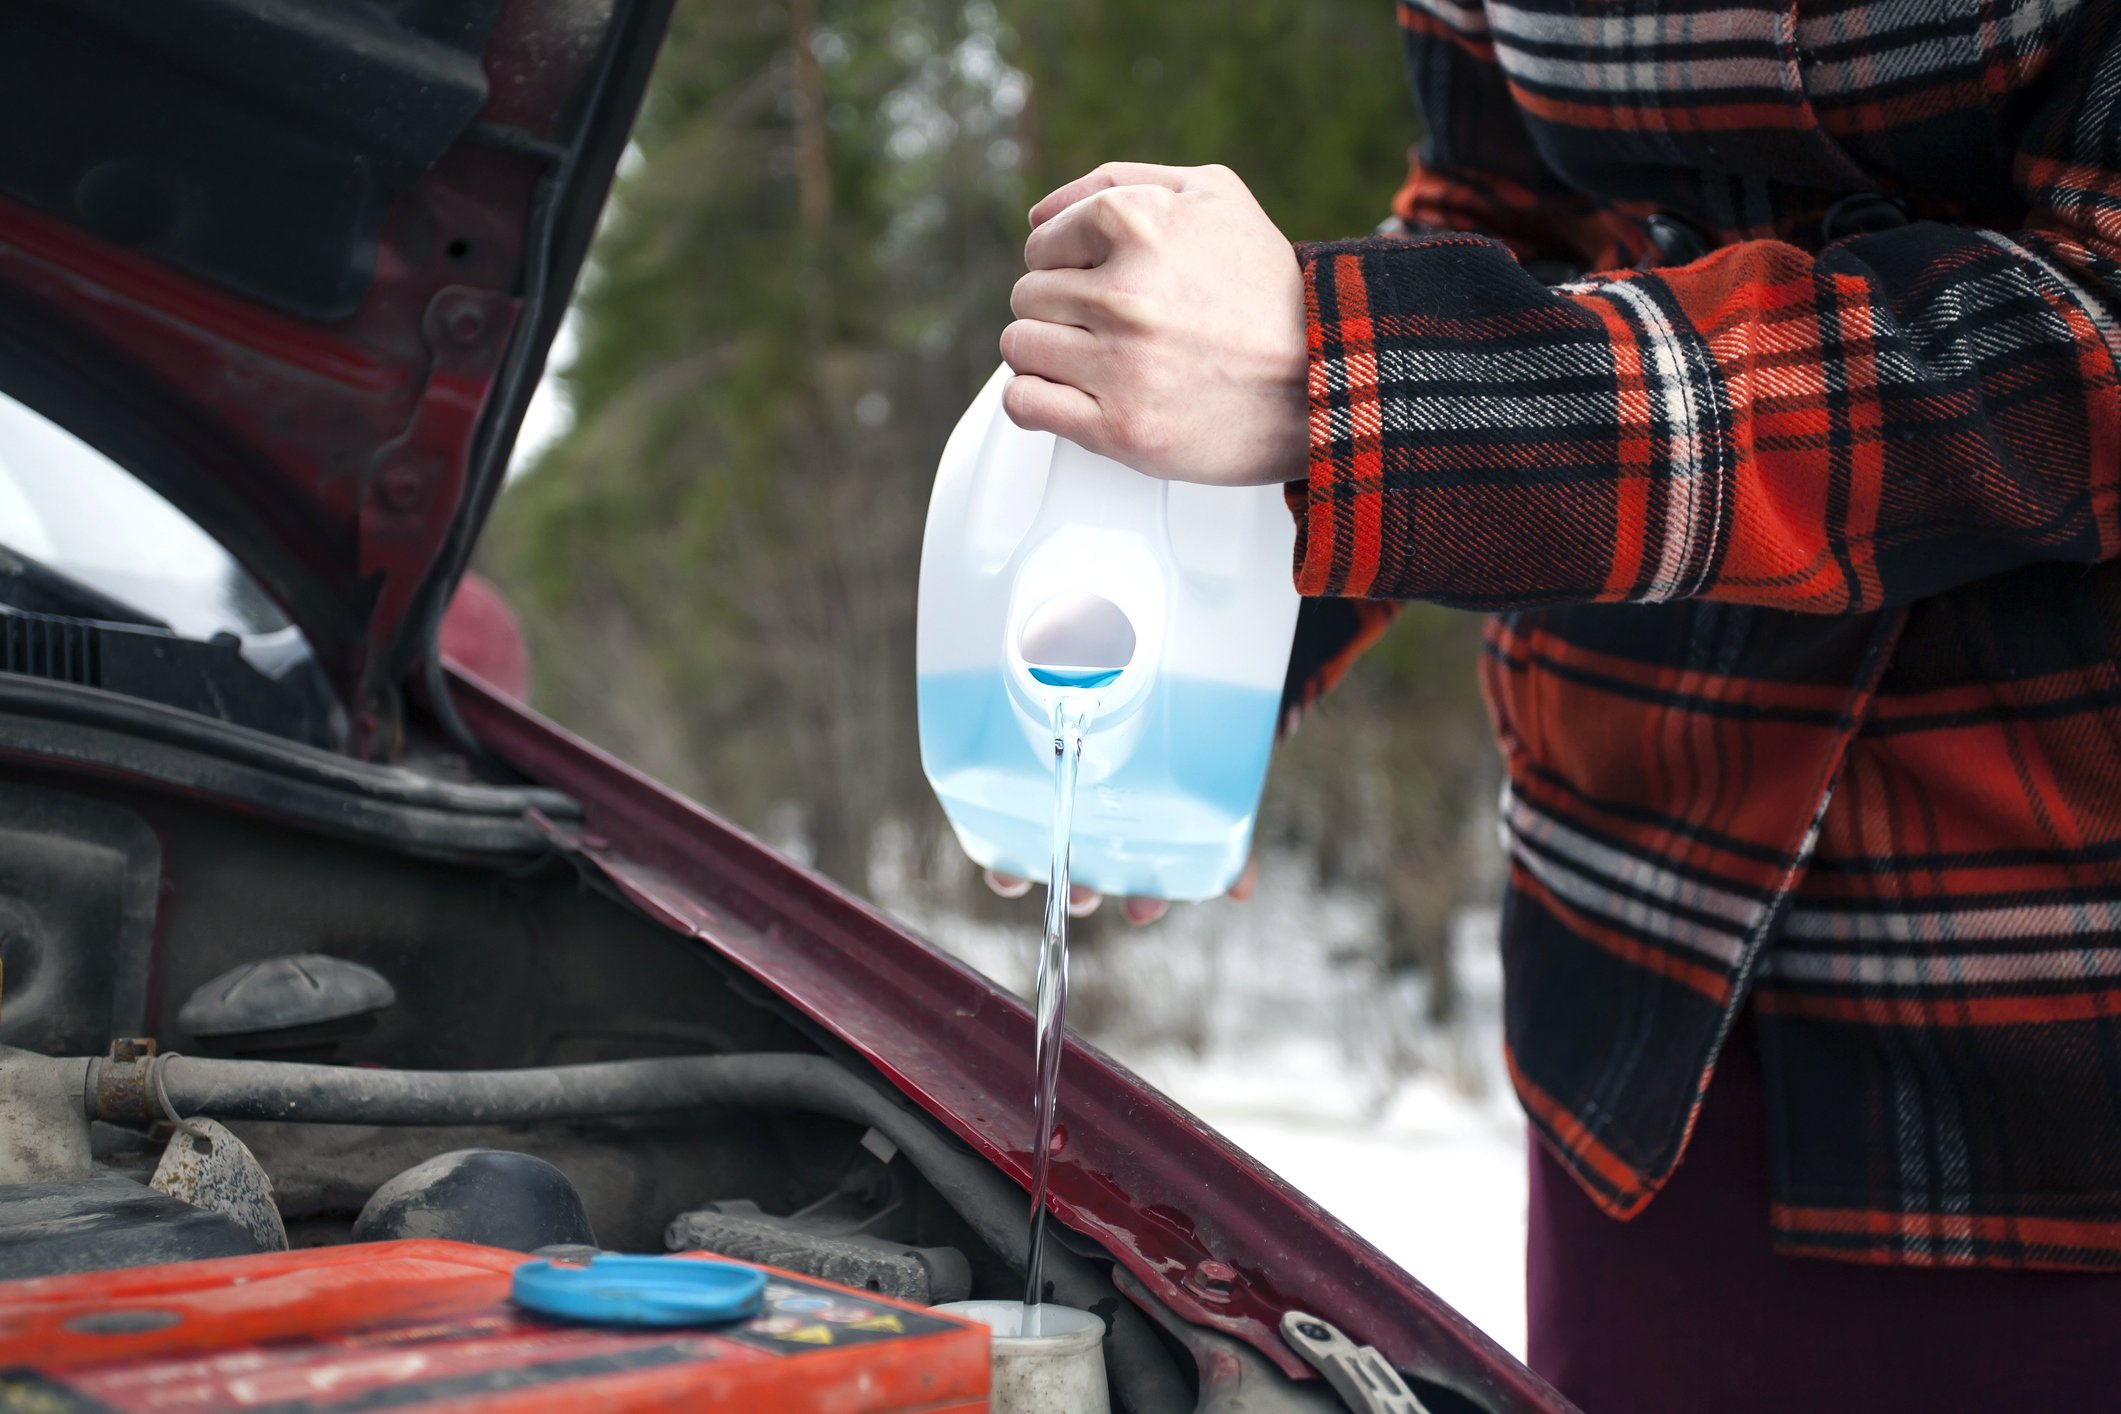 Does Freeze-Resistant Windshield Wiper Fluid Really Work?